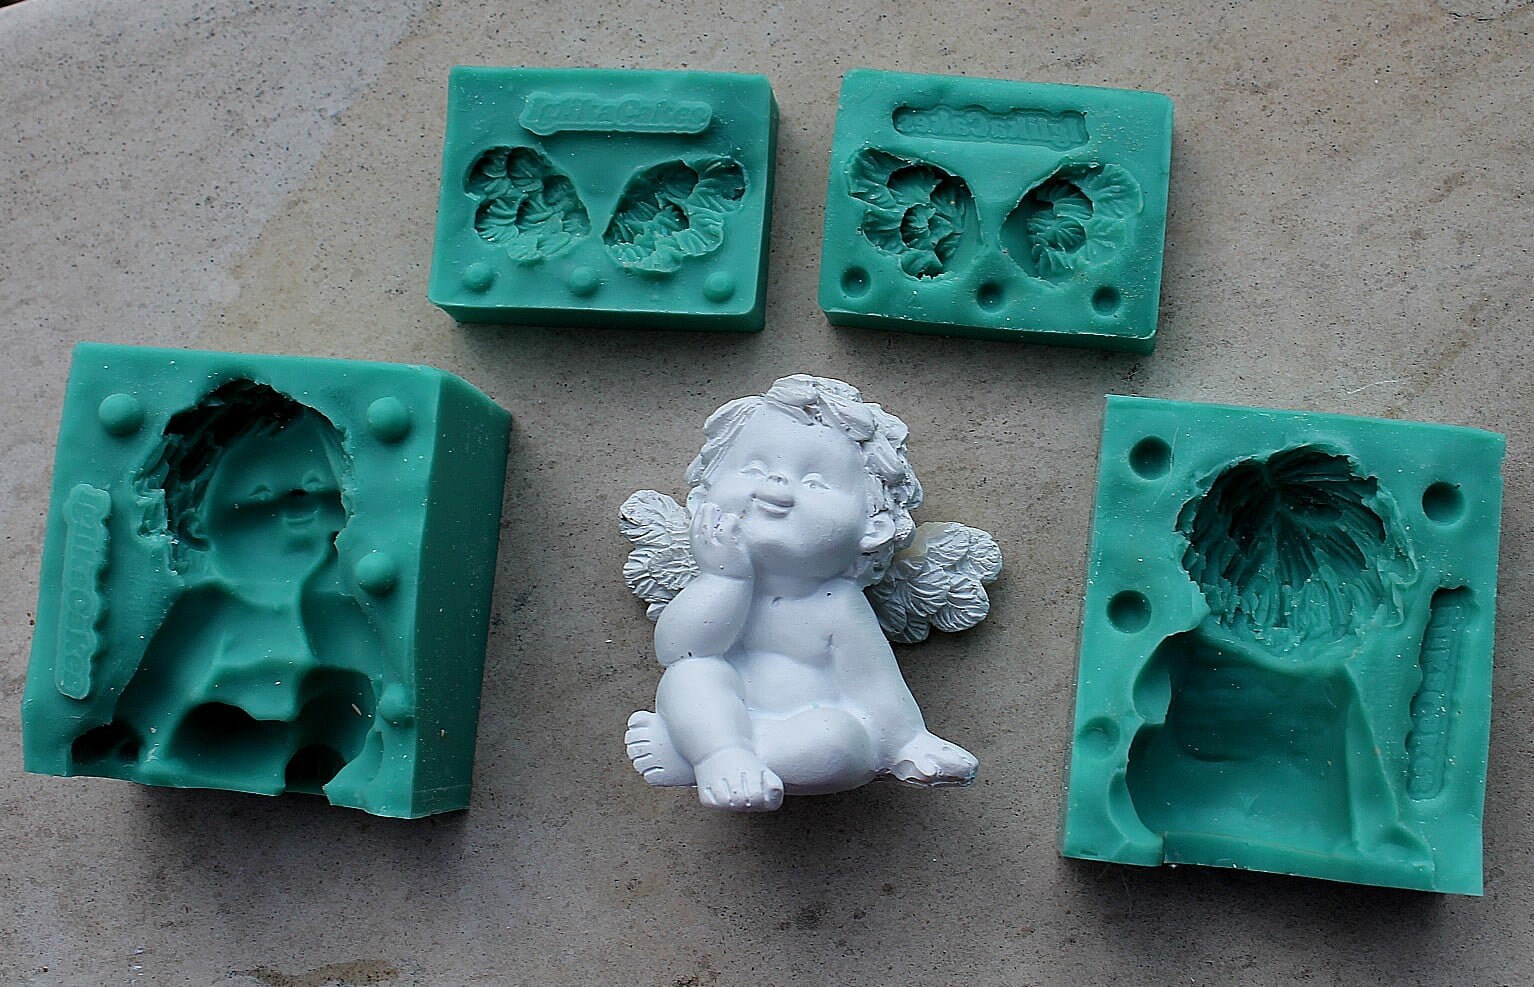 Silicone Mould Small Flowers and Leaves Sugarcraft Cake Decorating Fondant  / Fimo Mold 